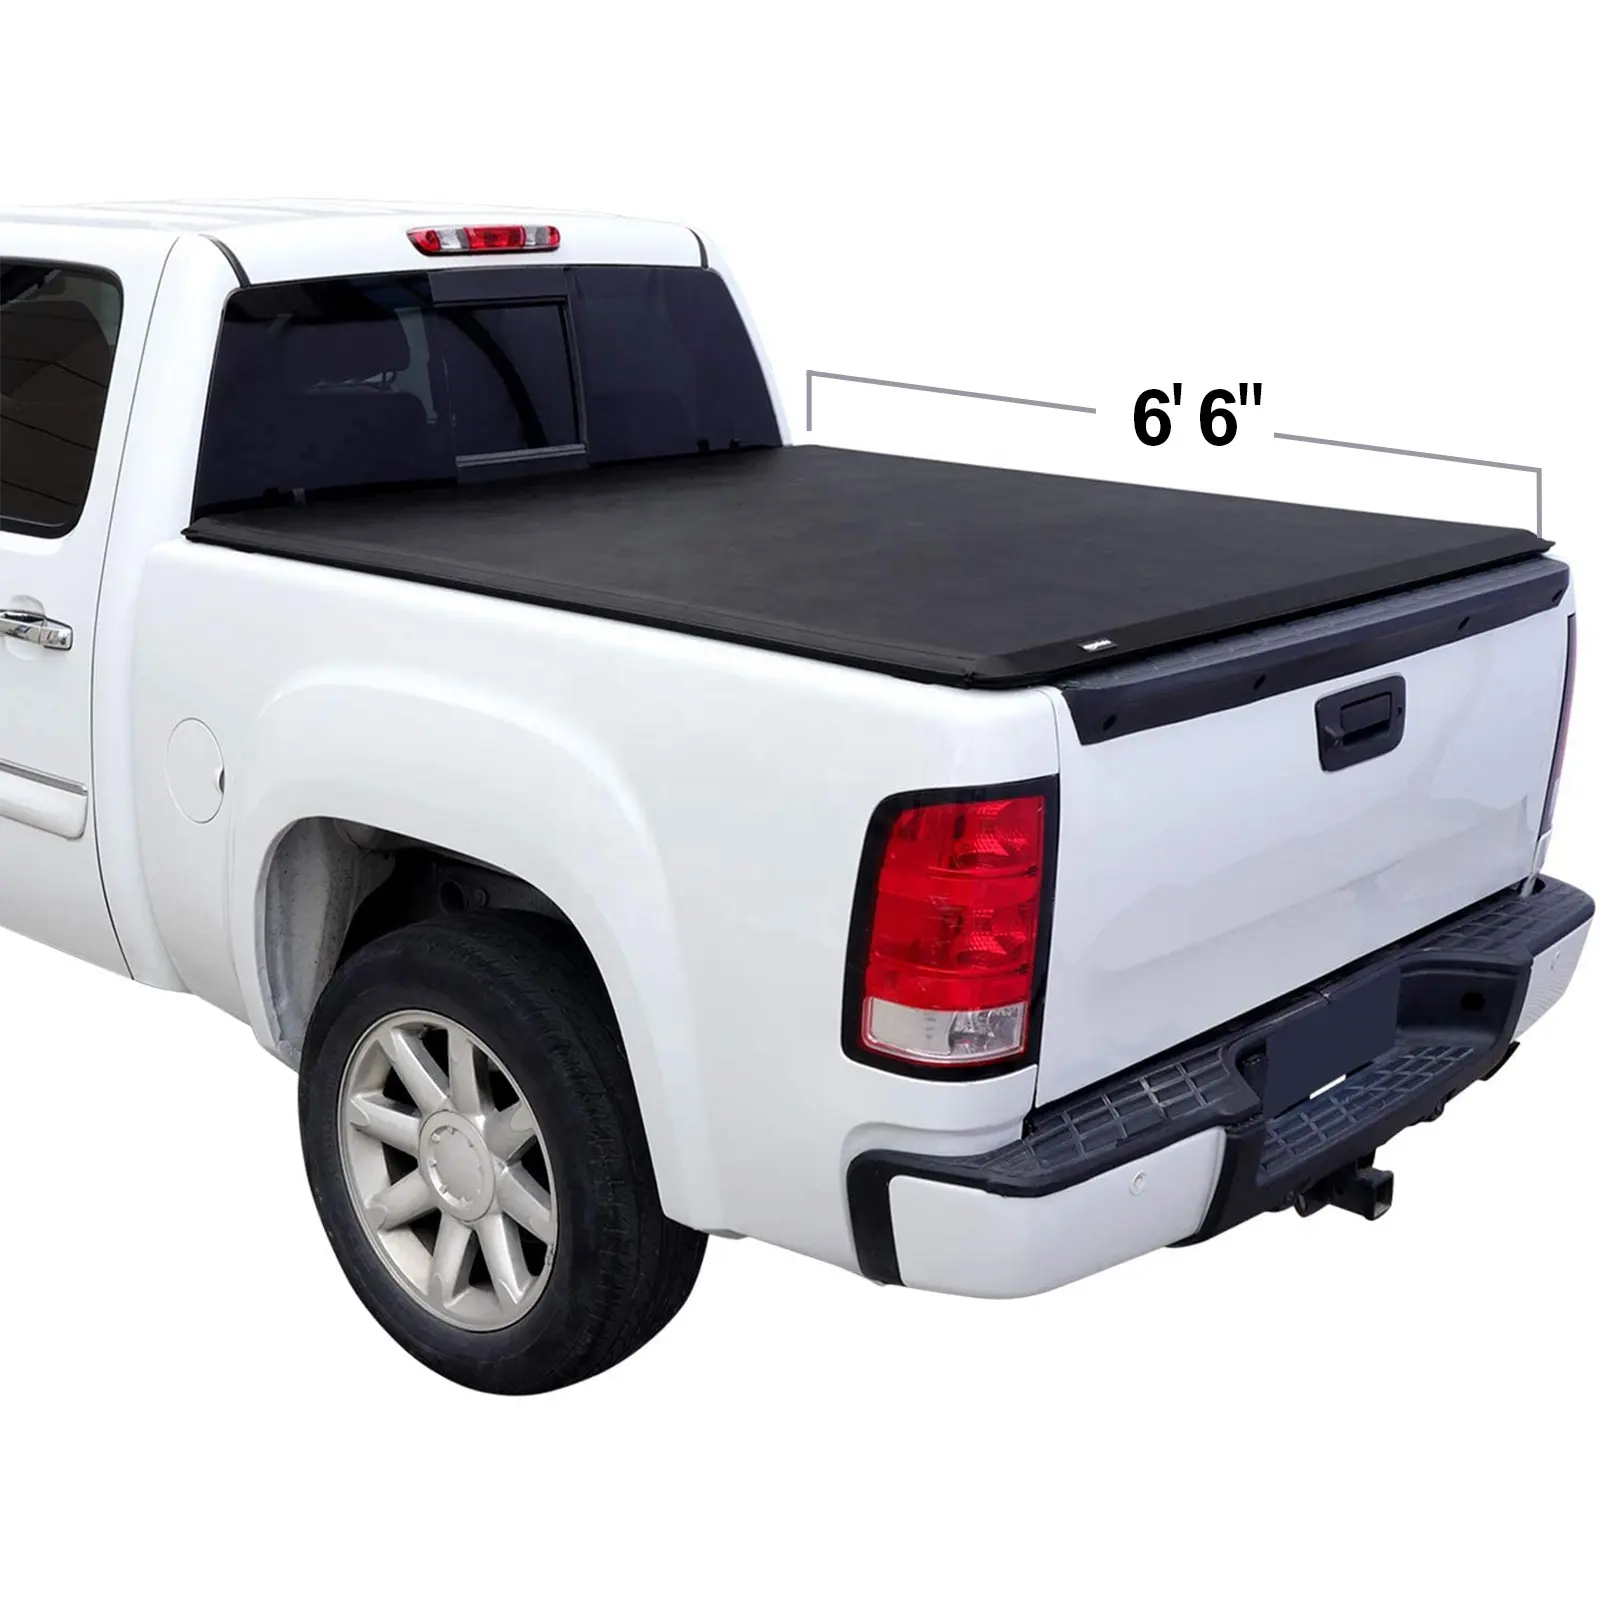 2021 The Best Soft Roll Bed Cover Retractable Tonneau Cover für Chevrolet GMC Std Short Bed 6.6FT